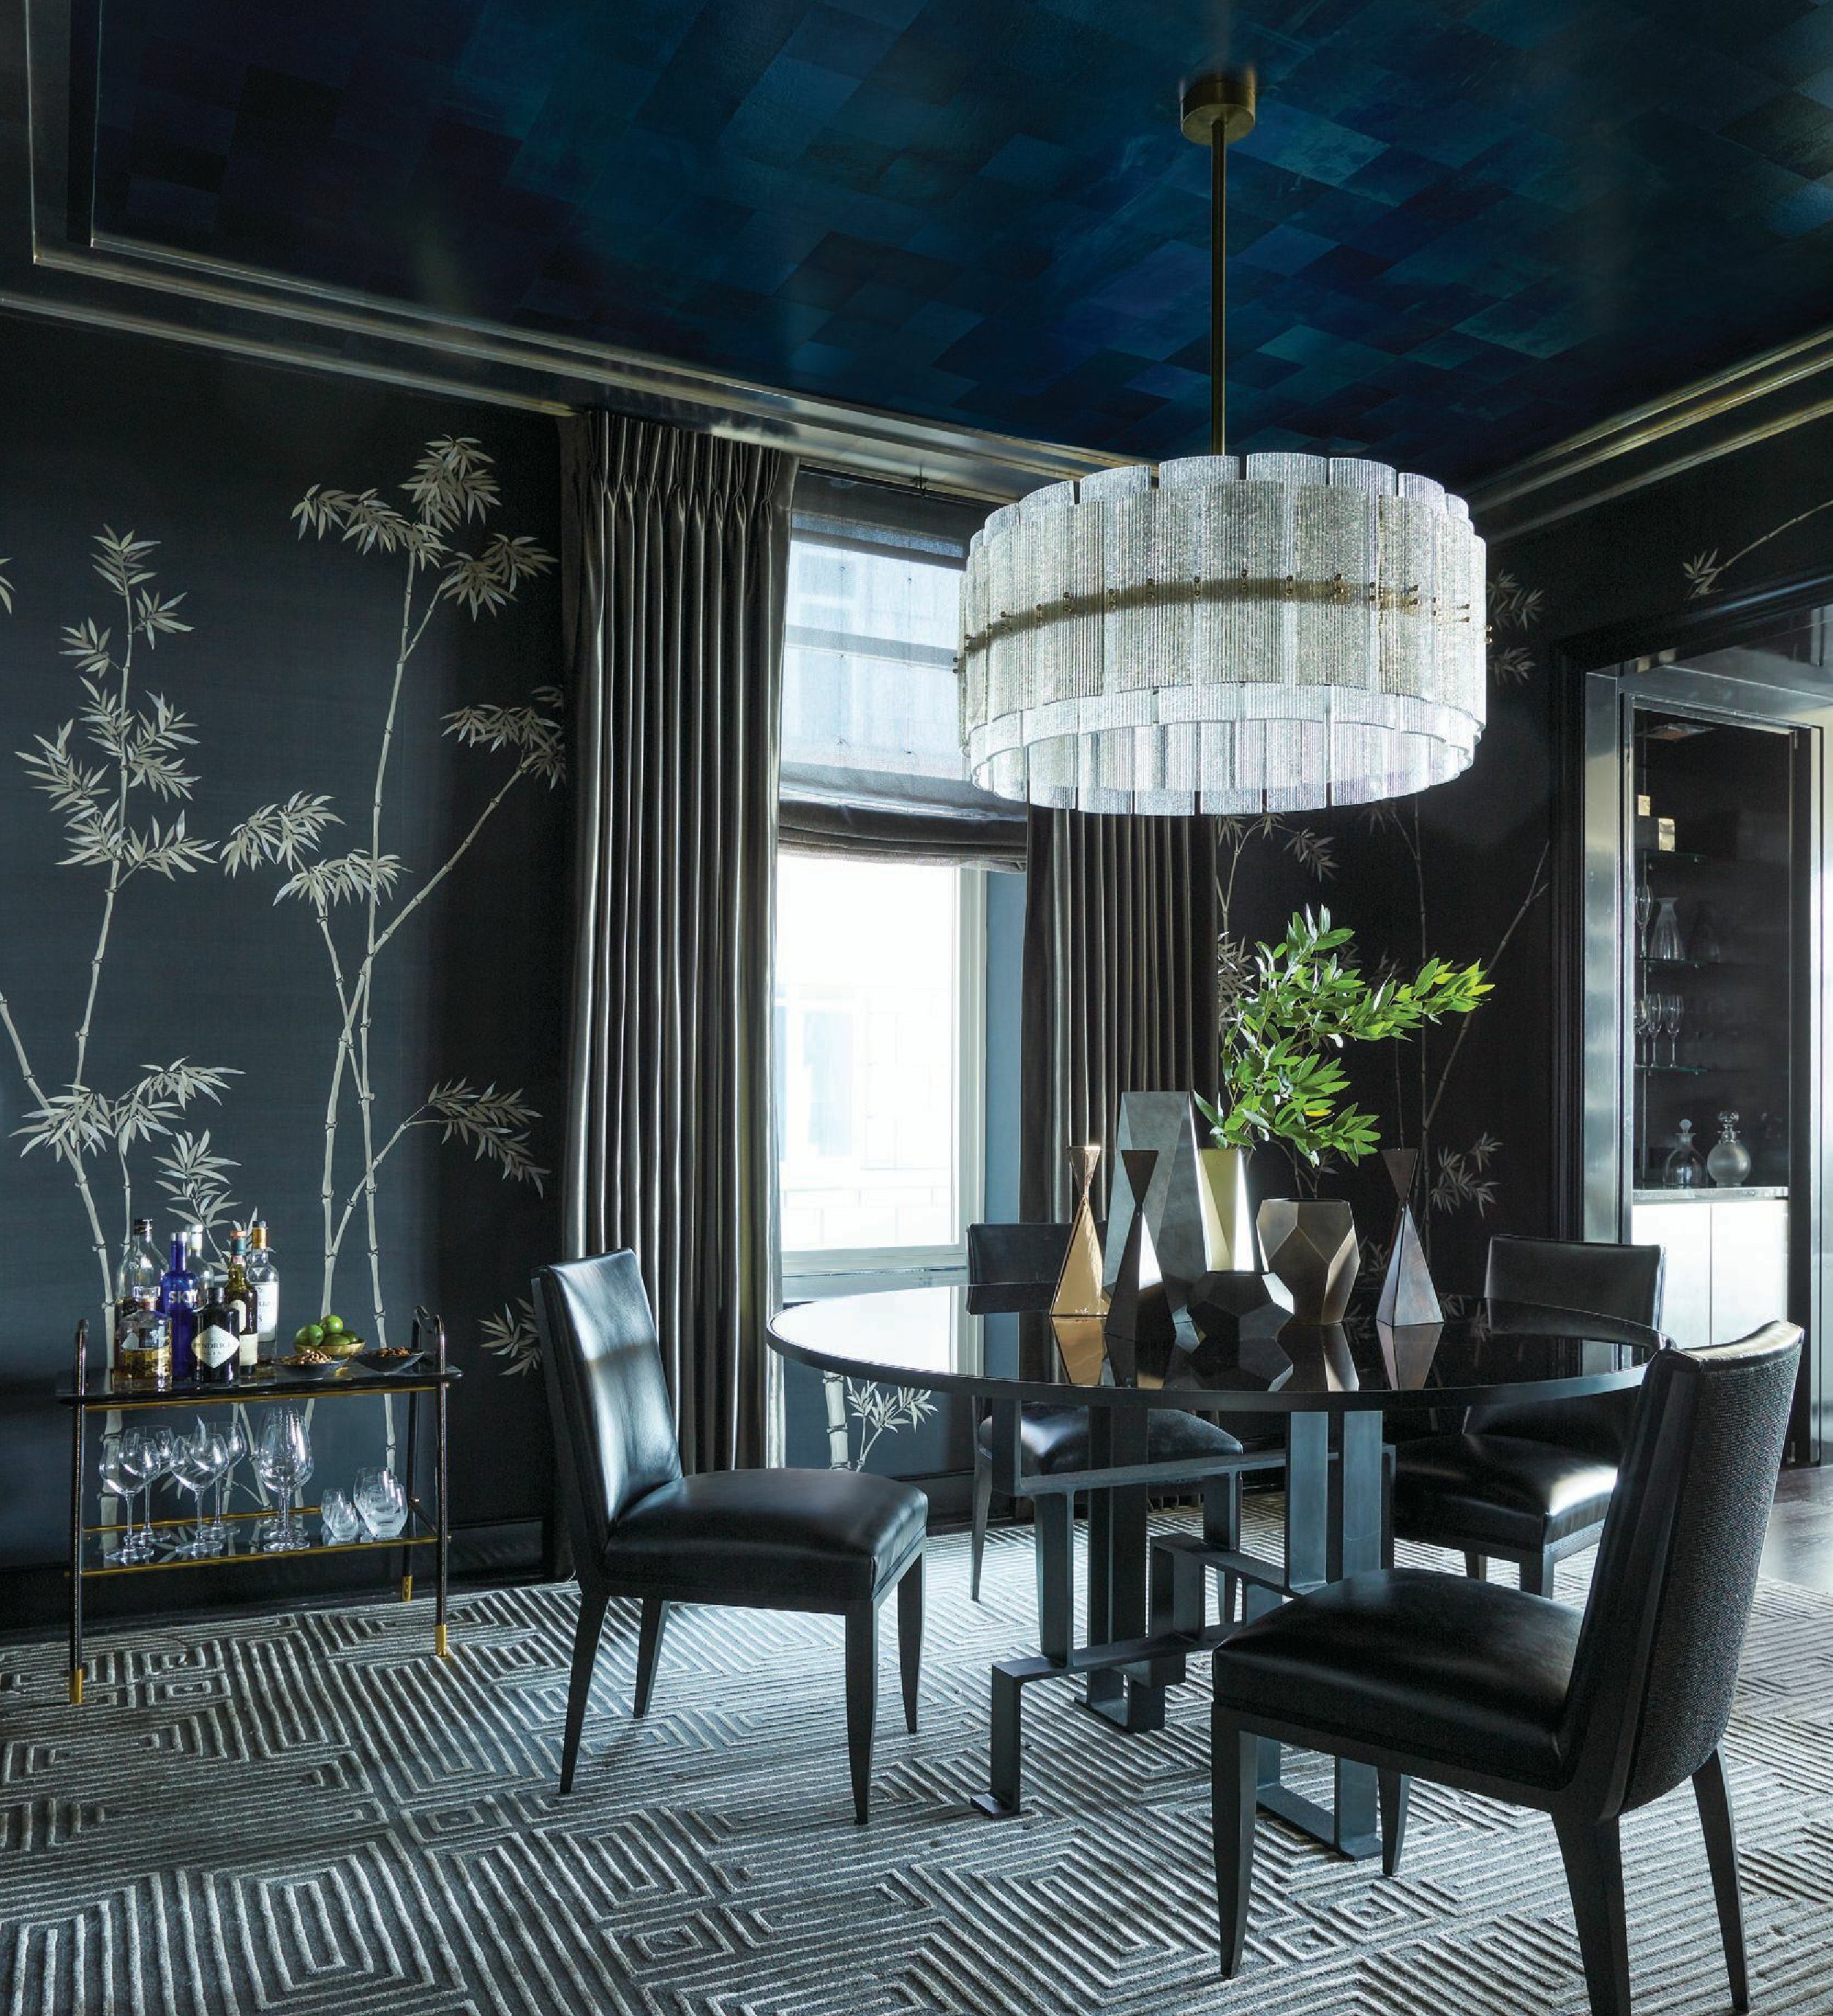 This moody Gold Coast project by Craig & Company seduces with wallpaper by de Gournay, rug by Scott Group, table by Jean de Merry, chairs by Holly Hunt and chandelier by L’Antiquaire. PHOTO COURTESY OF STEVEN HAULENBEEK STUDIO